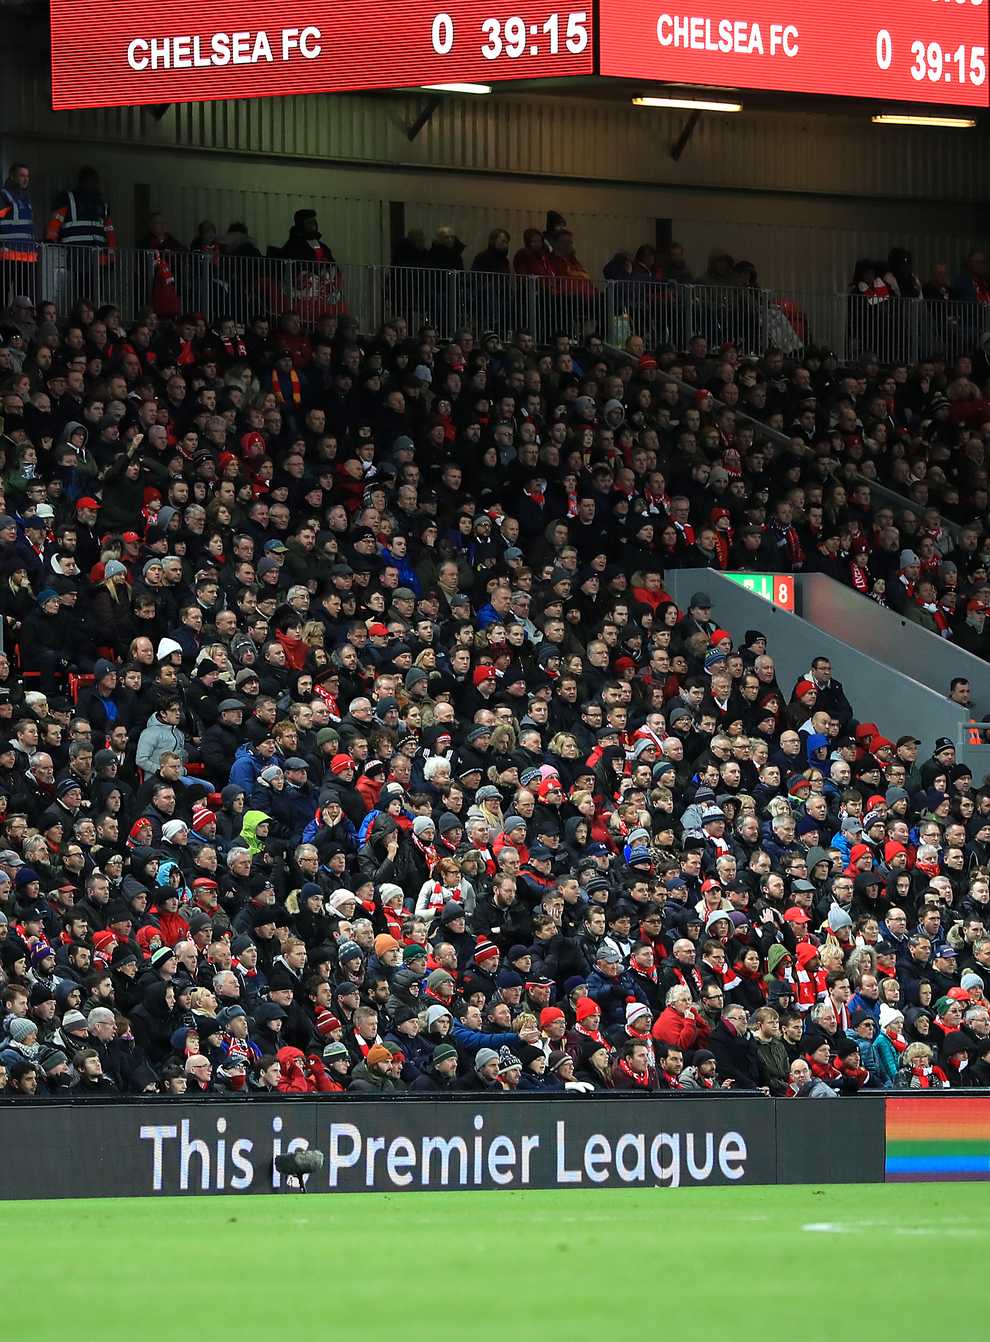 Liverpool have taken measures to stop homophobic chanting by fans (Peter Byrne/PA)